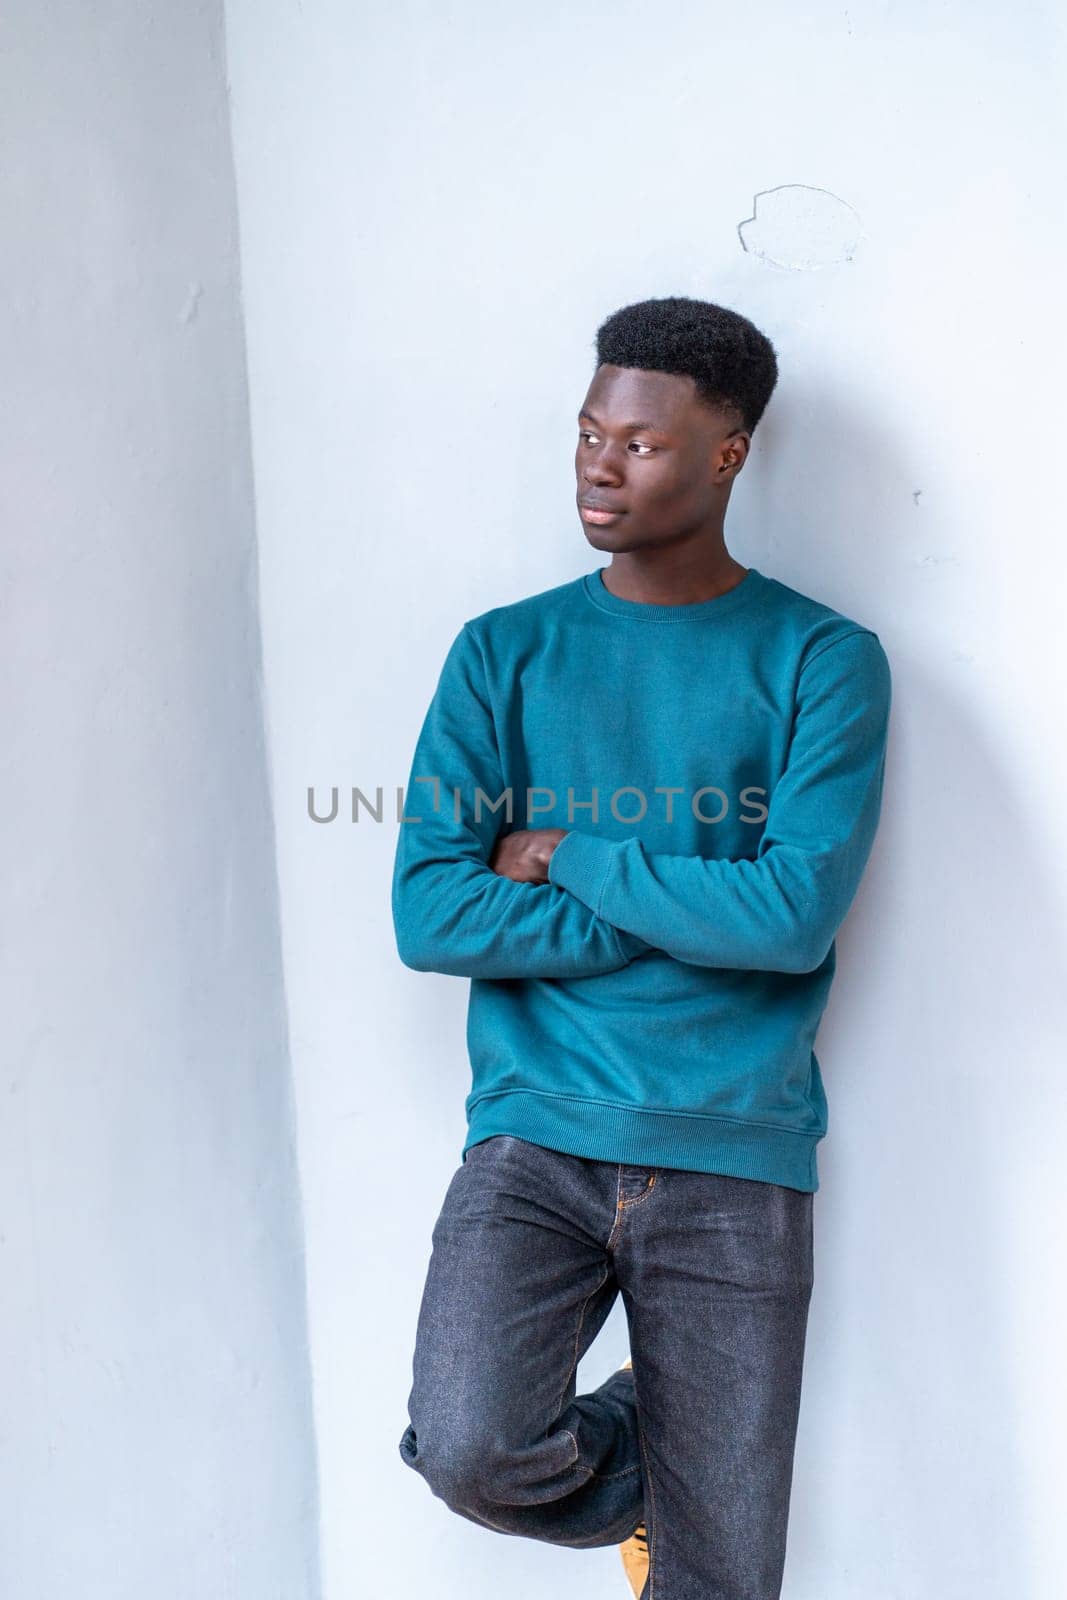 A young man in a blue sweatshirt and jeans stands against a white wall by Ceballos